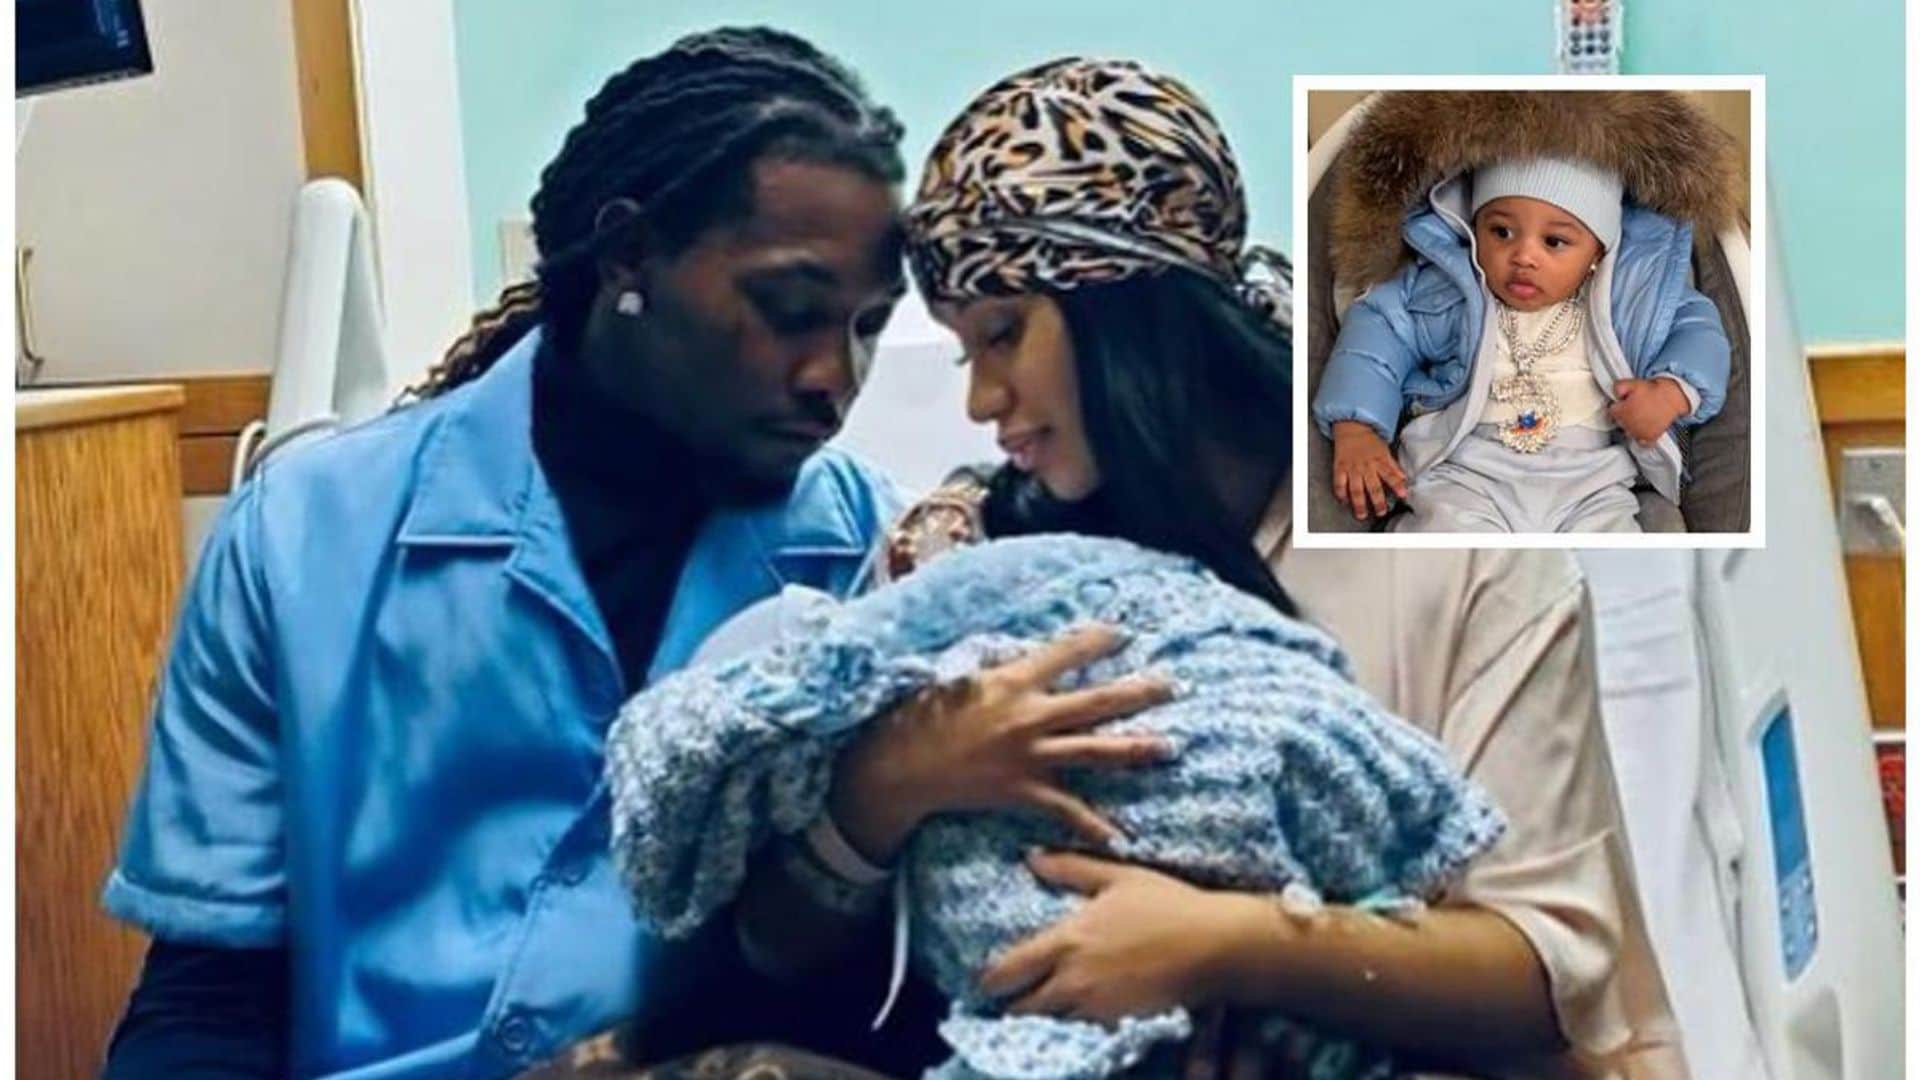 Cardi B and Offset reveal the name of their baby boy and show his sweet face